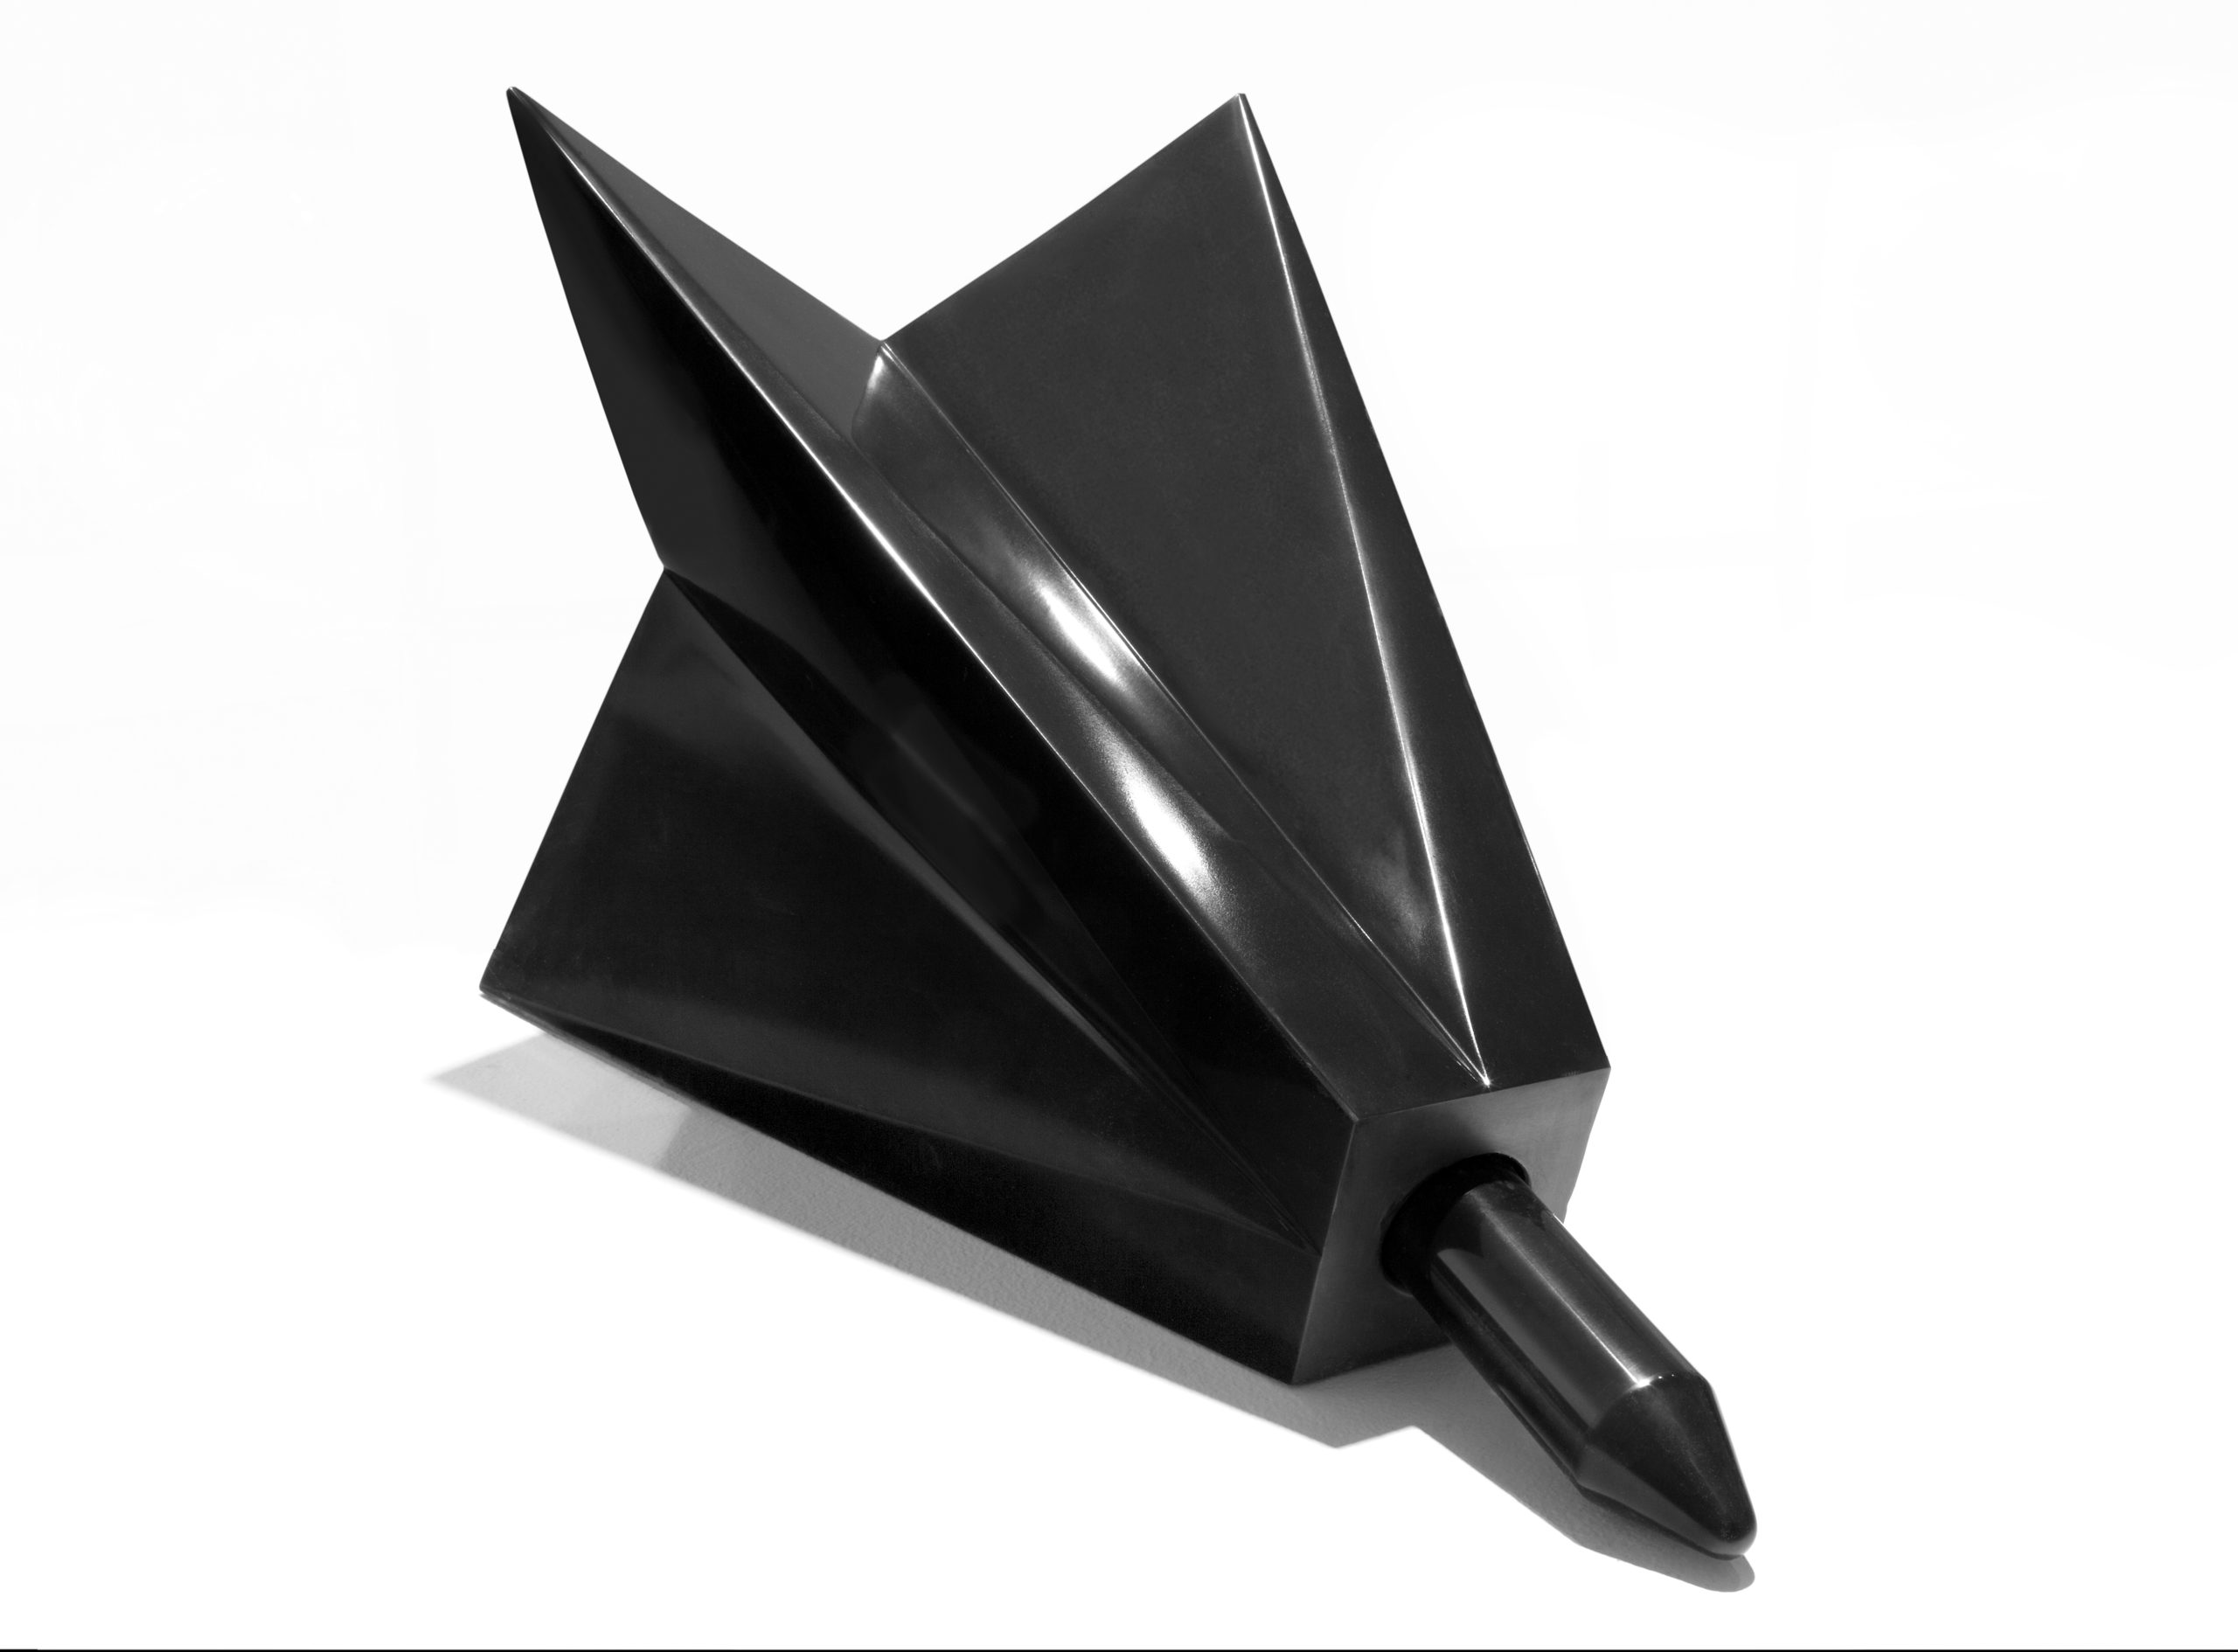 Claire Lieberman: "Star Fleet", 2017. Carved and polished black marble, 15" x 18" x 26.25".